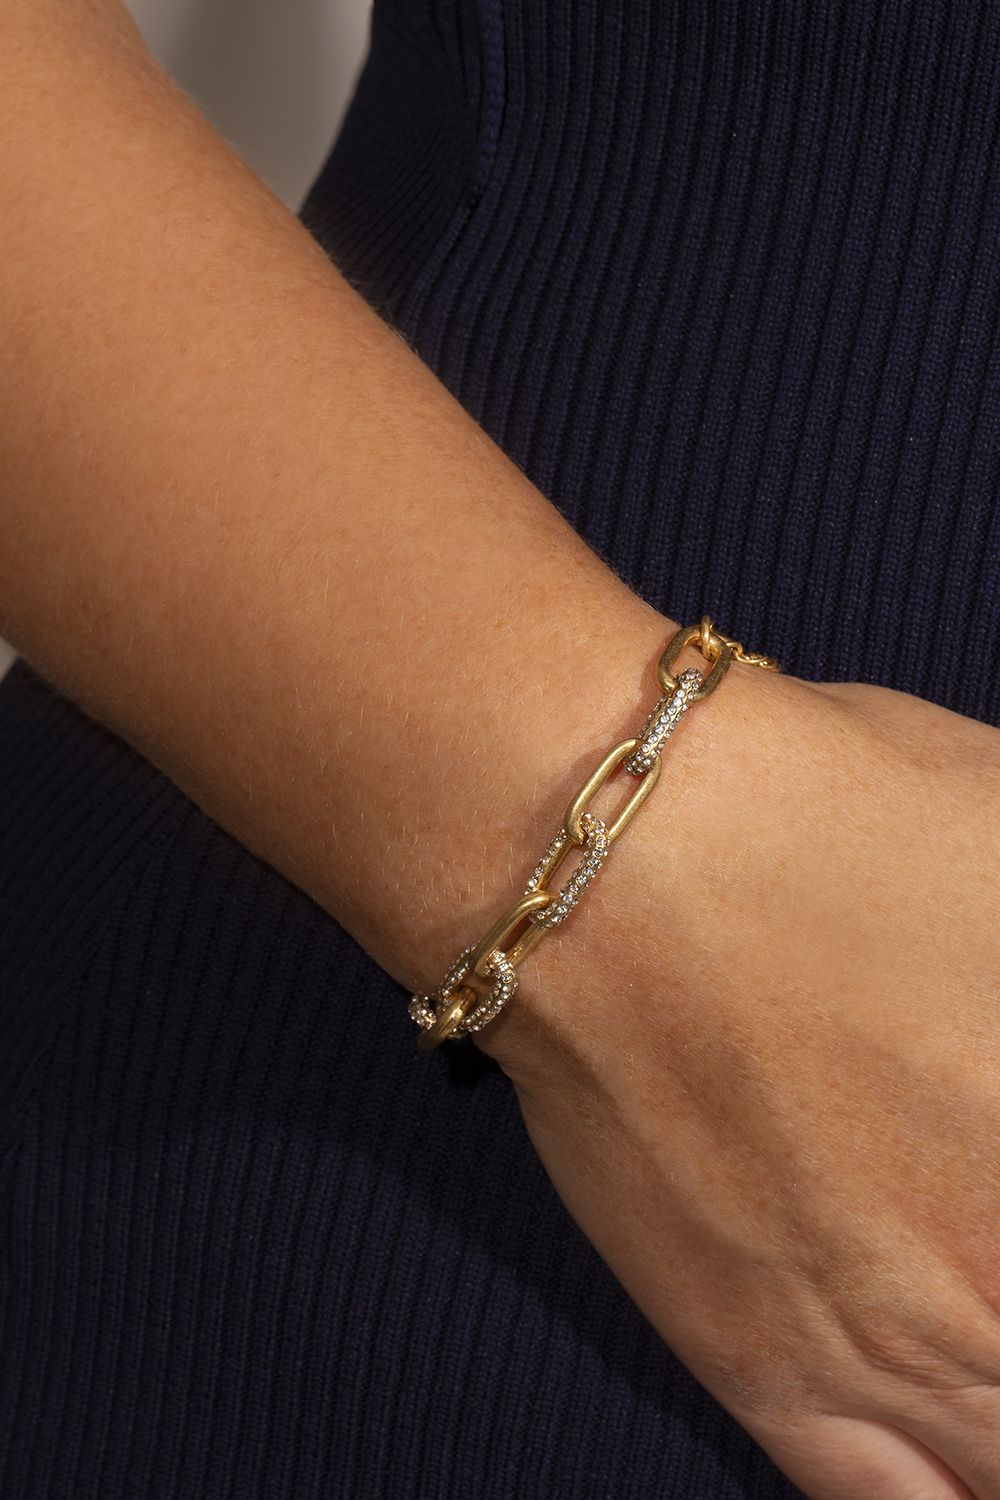 This chunky pave chain bracelet is the staple piece you need this winter! It adds such an on trend edge to any outfit, whether it's a night out dress or a jumper and jeans. The beautiful 7 inch gold plated chain features pave encrusted links on one side, giving a delicate edge to an otherwise strong piece. The chain is fastened with a lobster clasp and has a 4cm extender chain to easily adjust. It also comes with a matching necklace and they really are a match made in heaven! When in doubt, go simple and style it out.